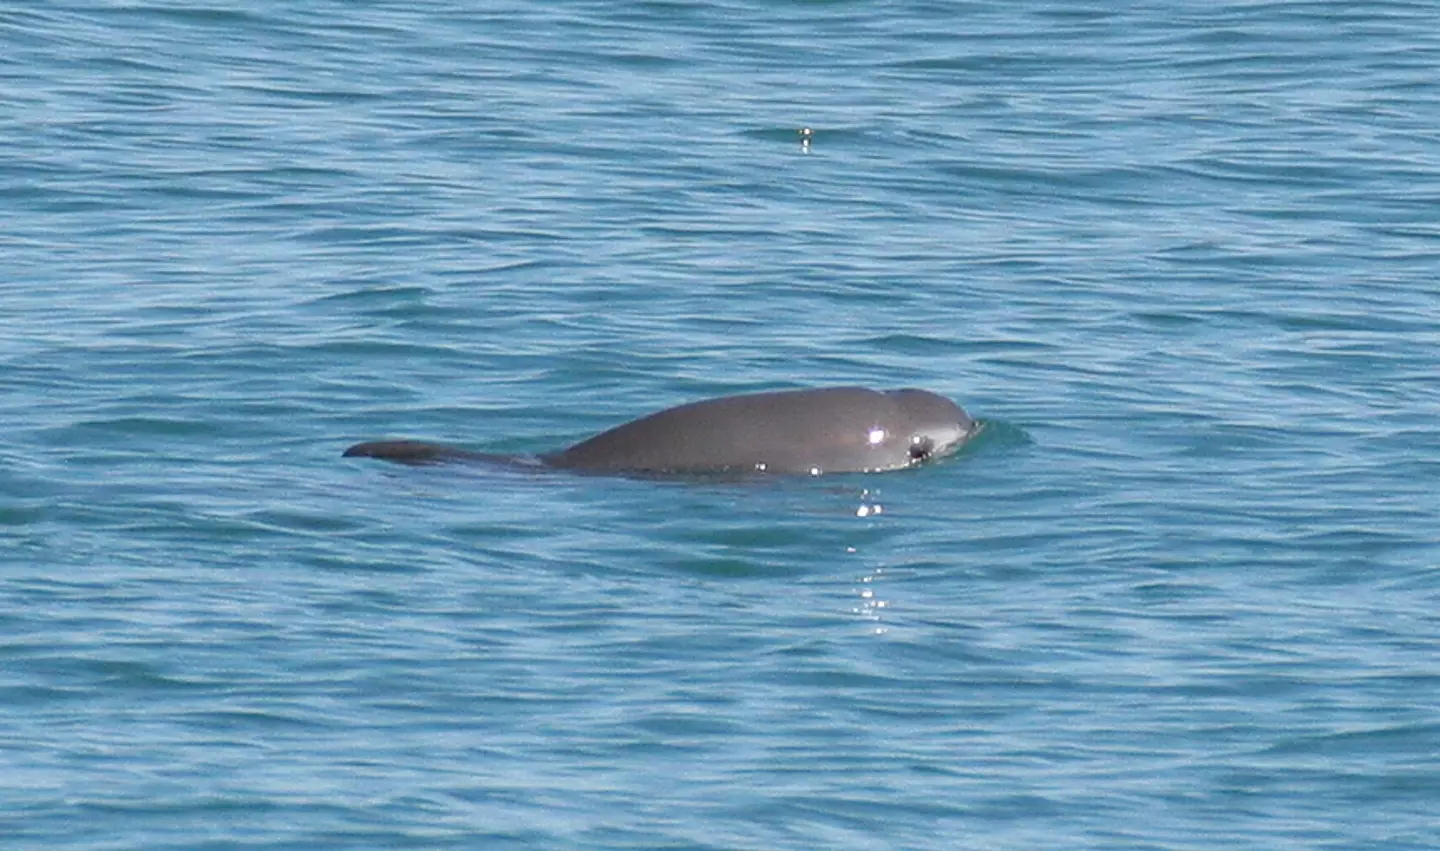 Experts now fear there are just vaquitas left in the wild.